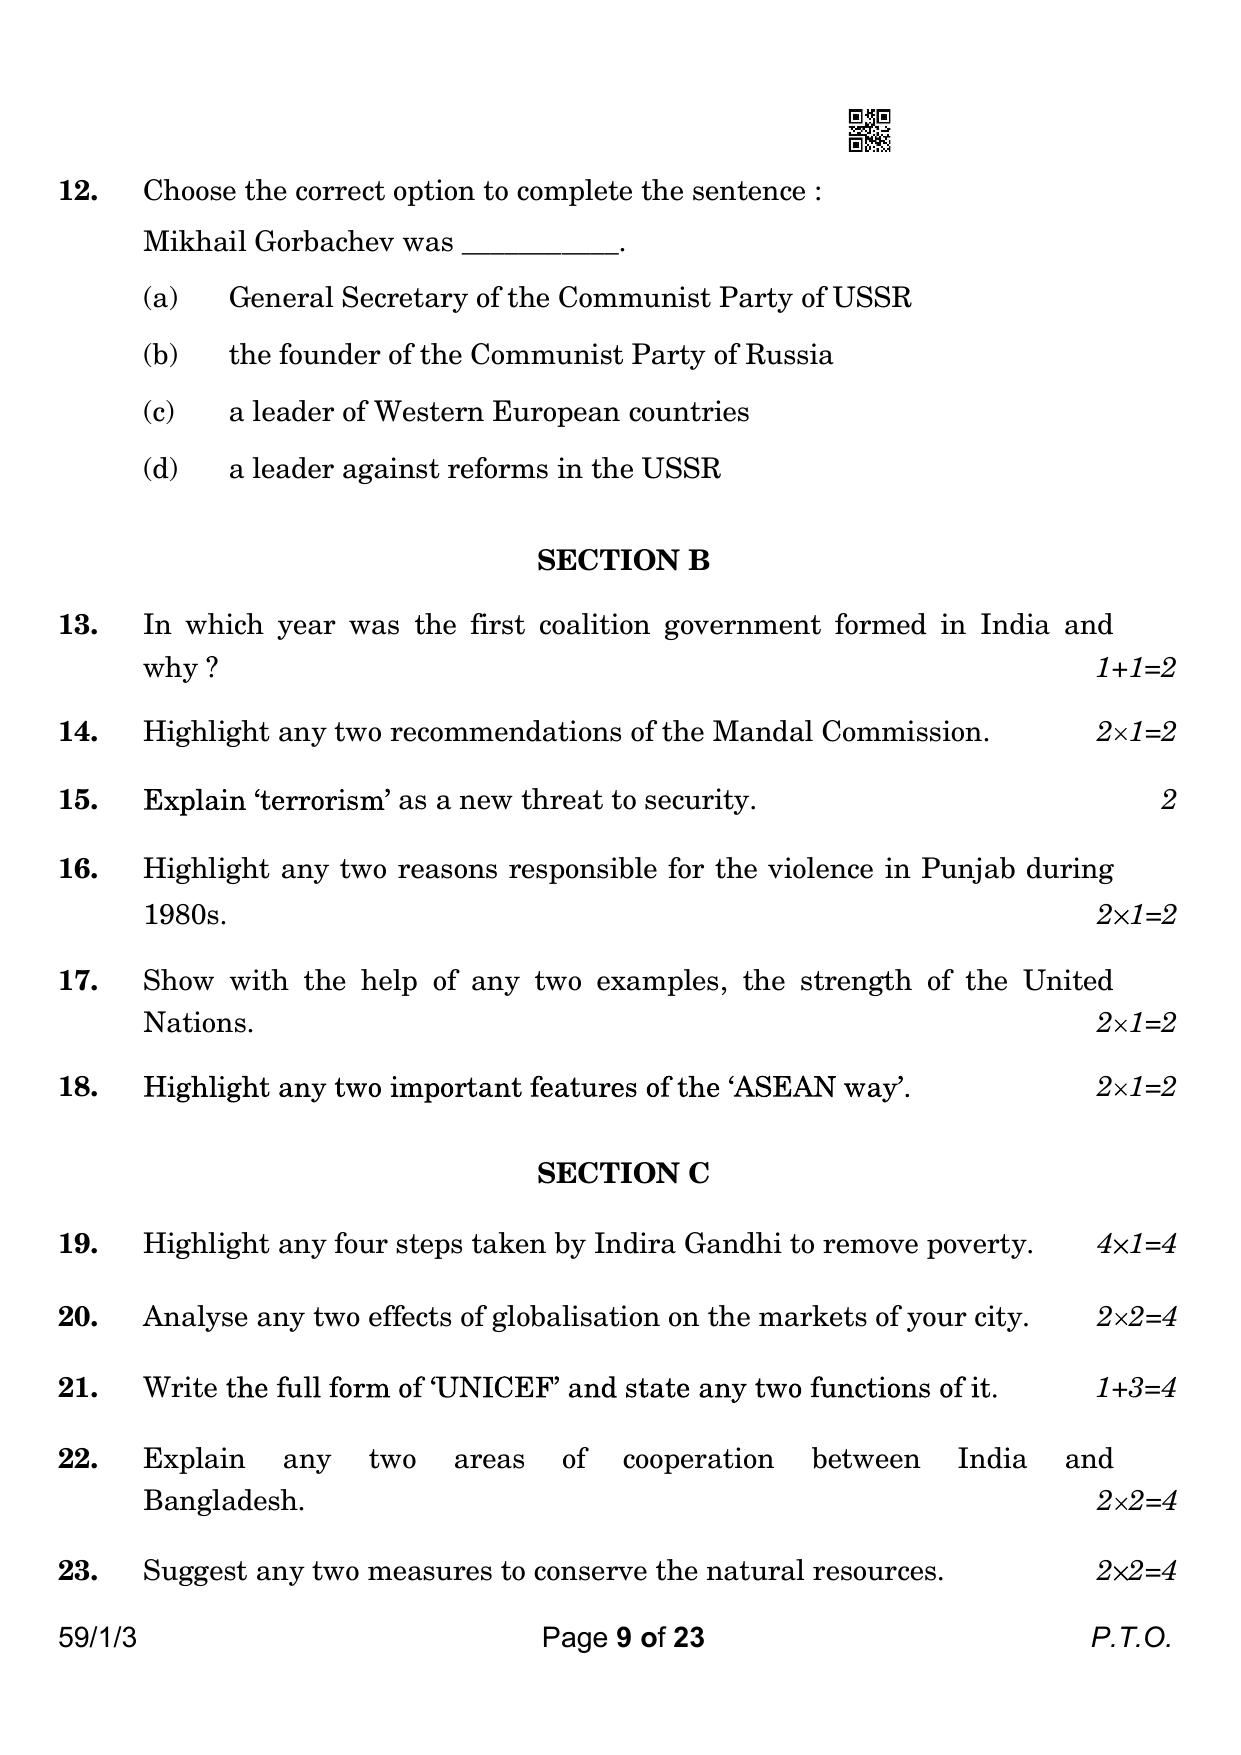 CBSE Class 12 59-1-3 Political Science 2023 Question Paper - Page 9